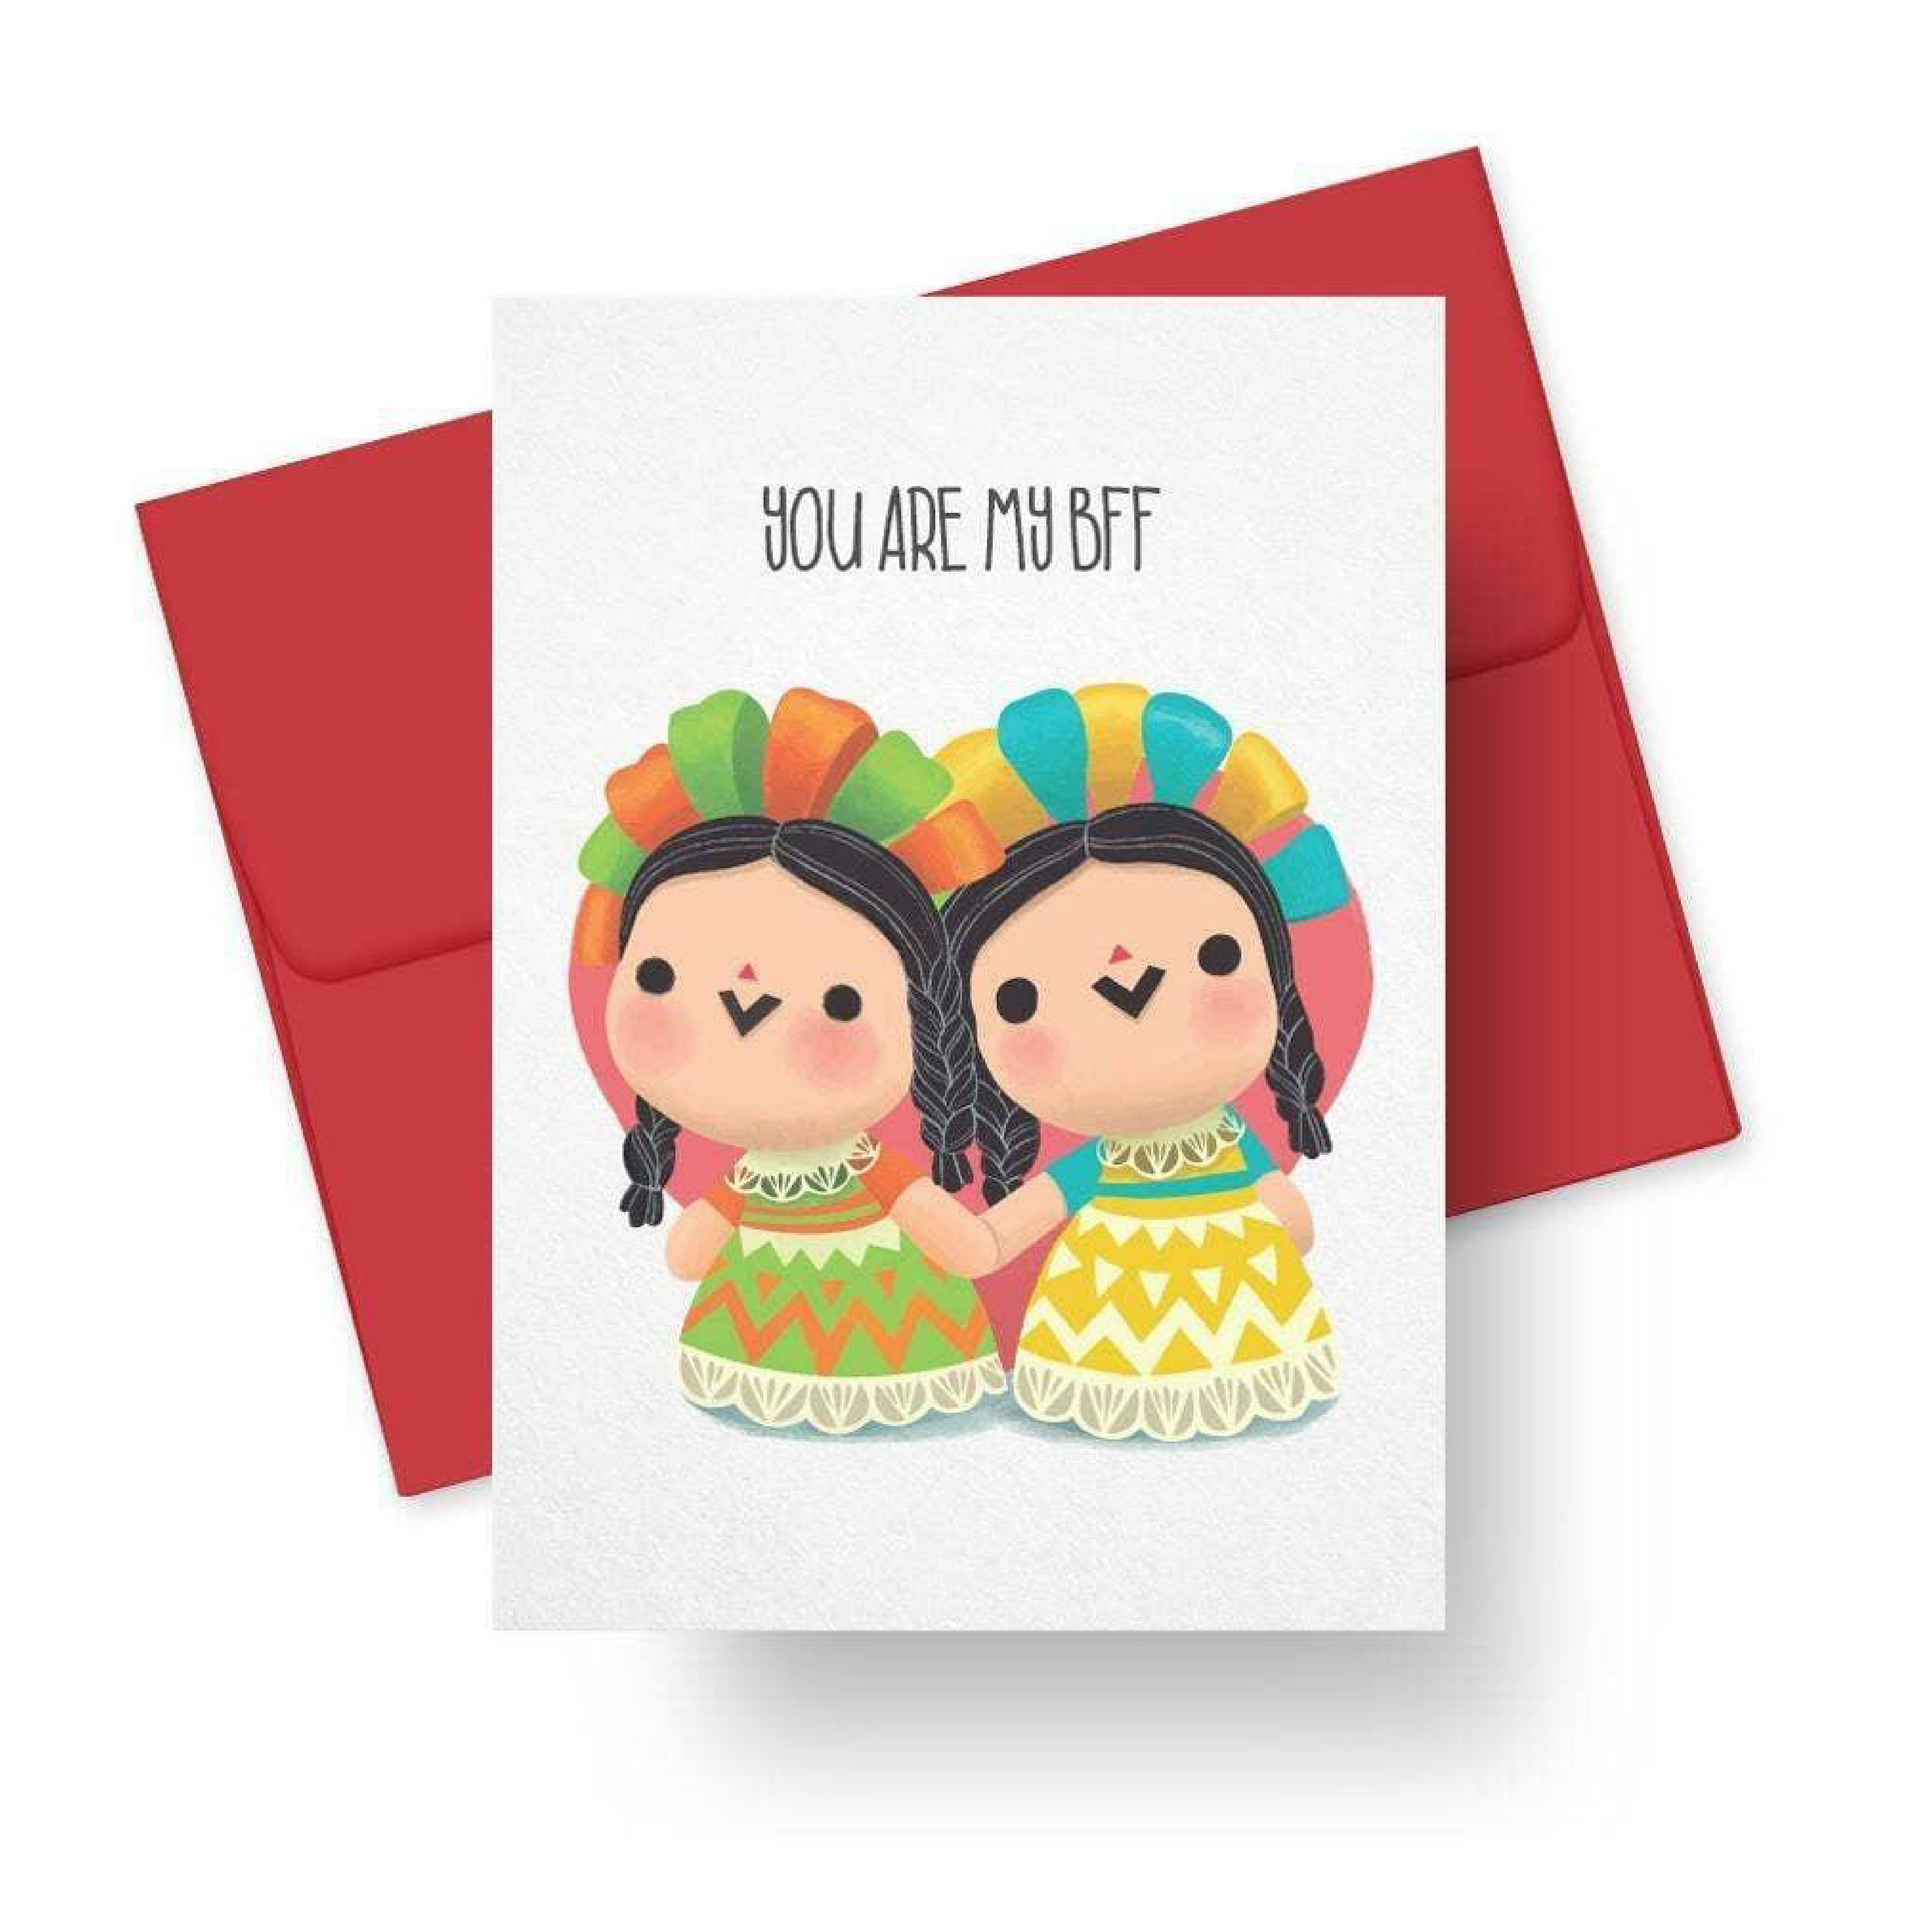 You Are My BFF - Greeting Card